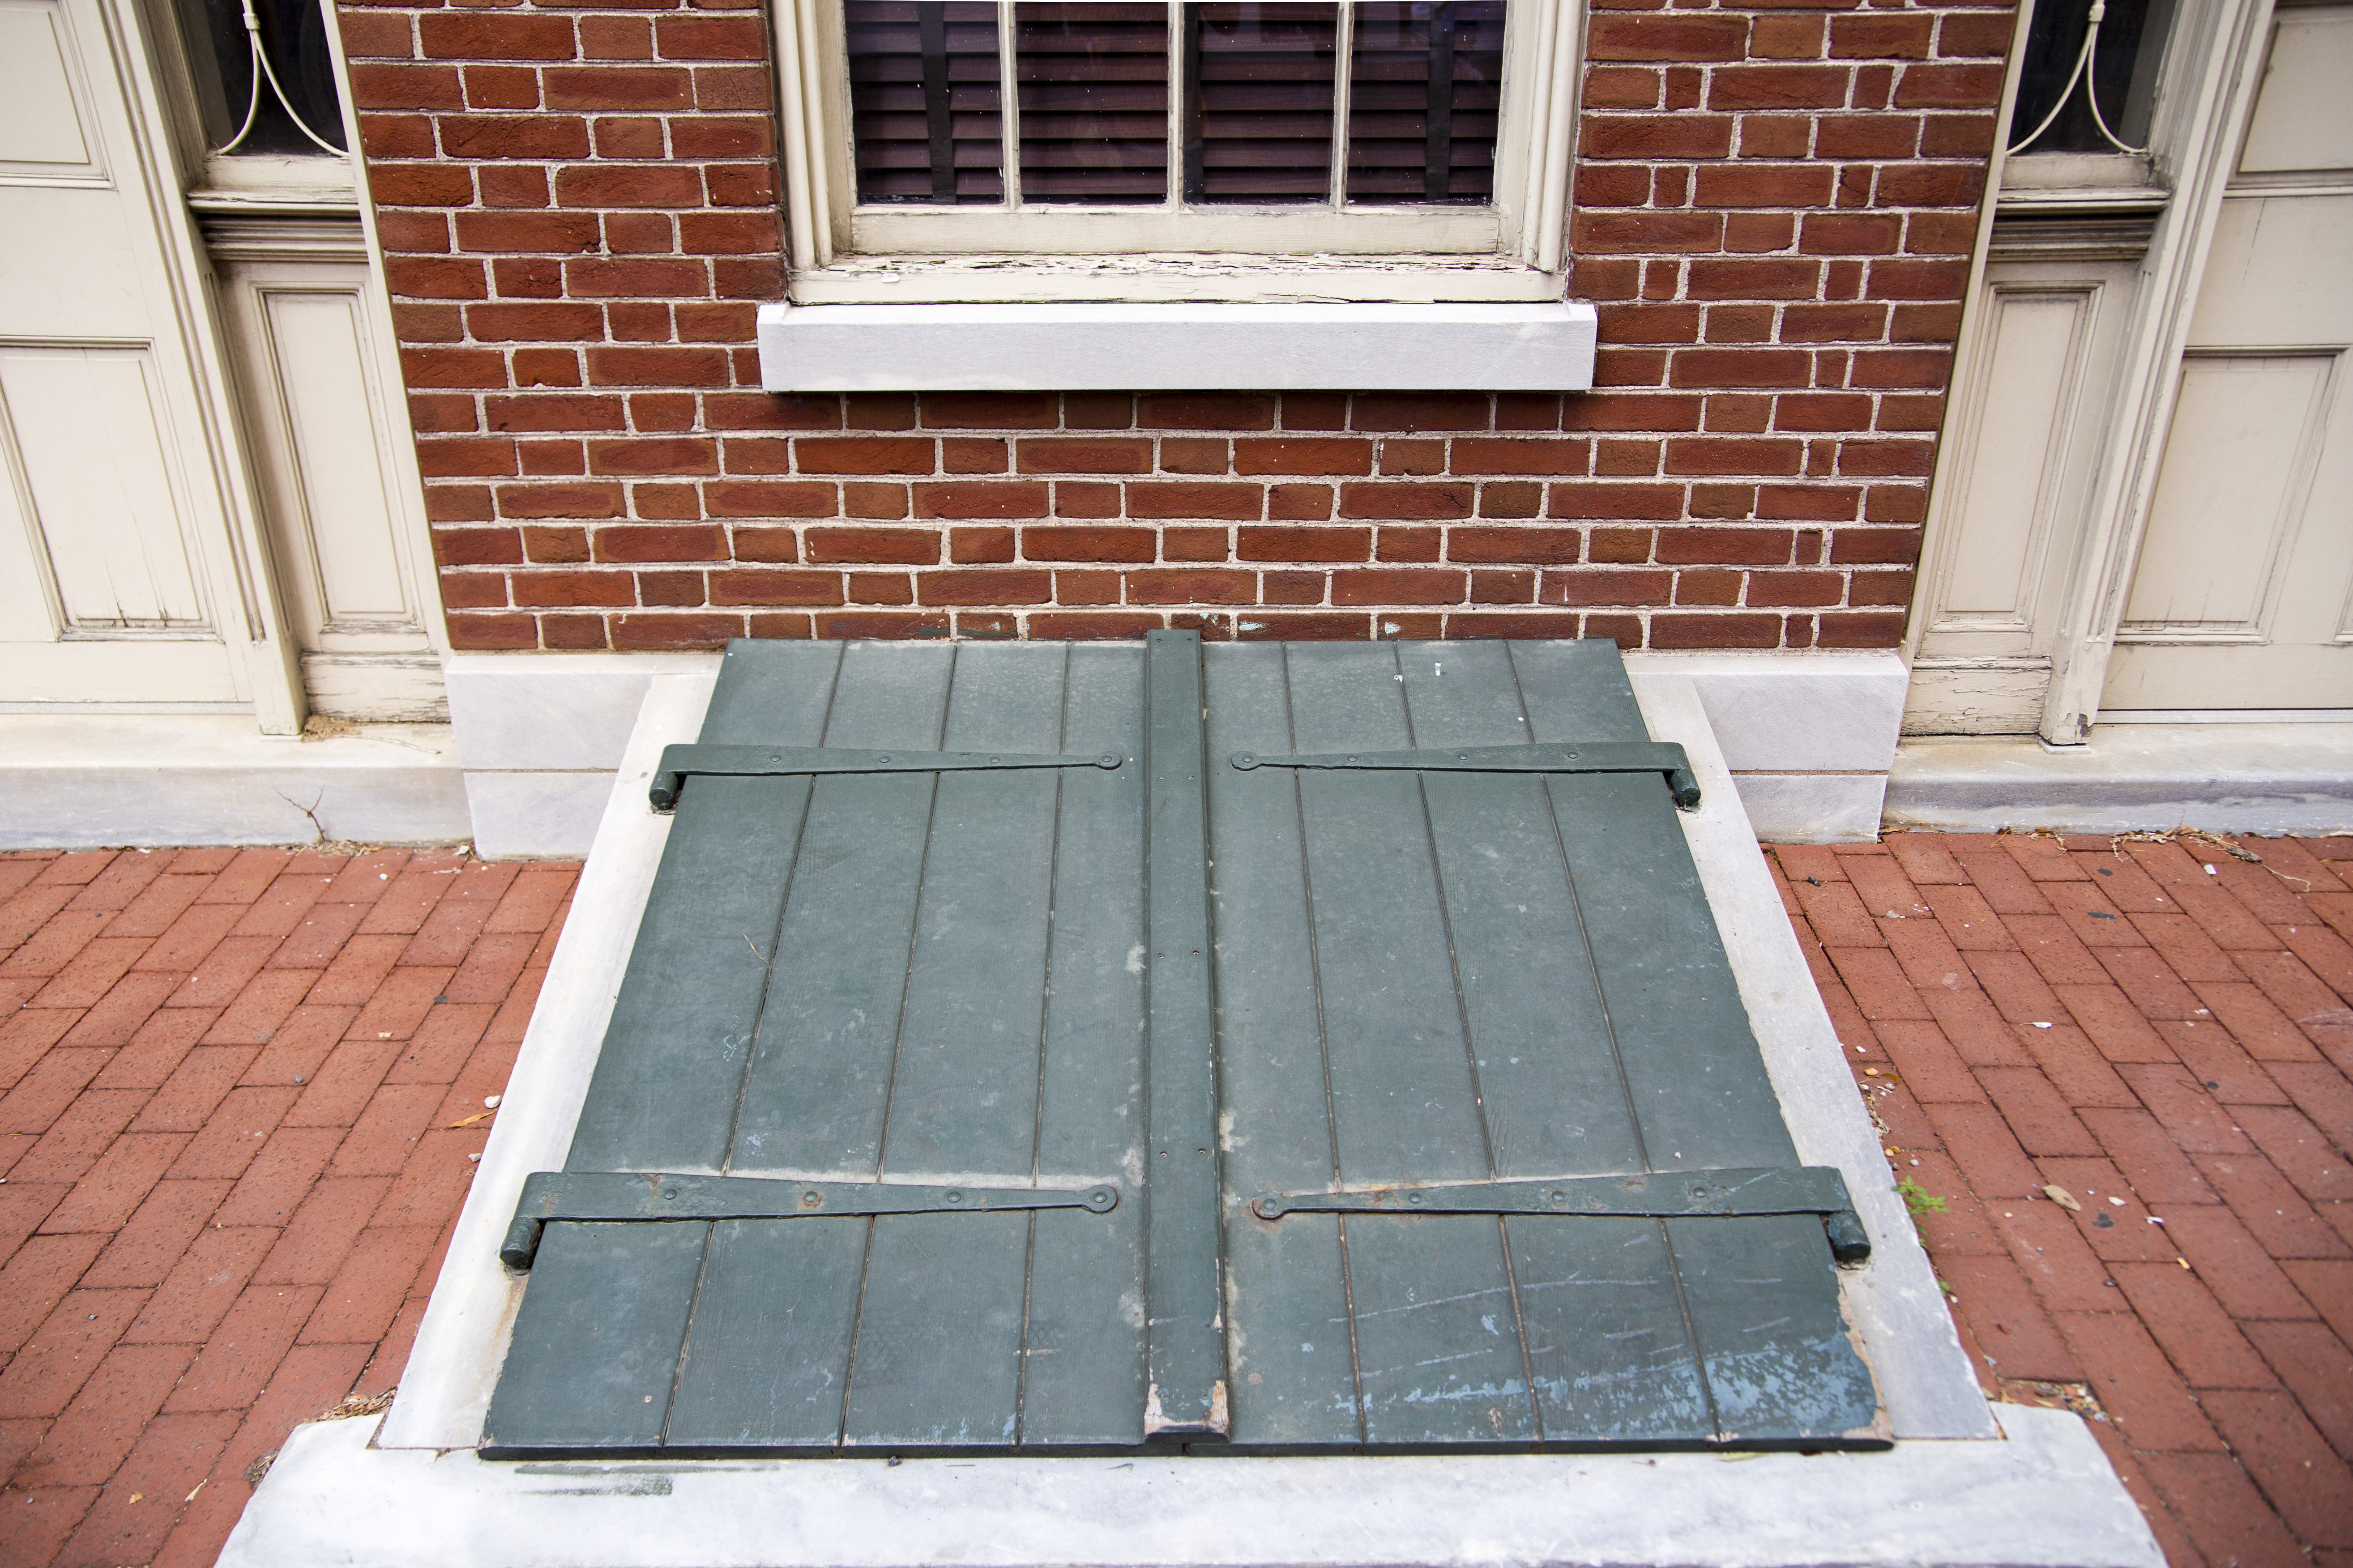 3 Reasons Why Your Home Needs a Bulkhead Basement Door